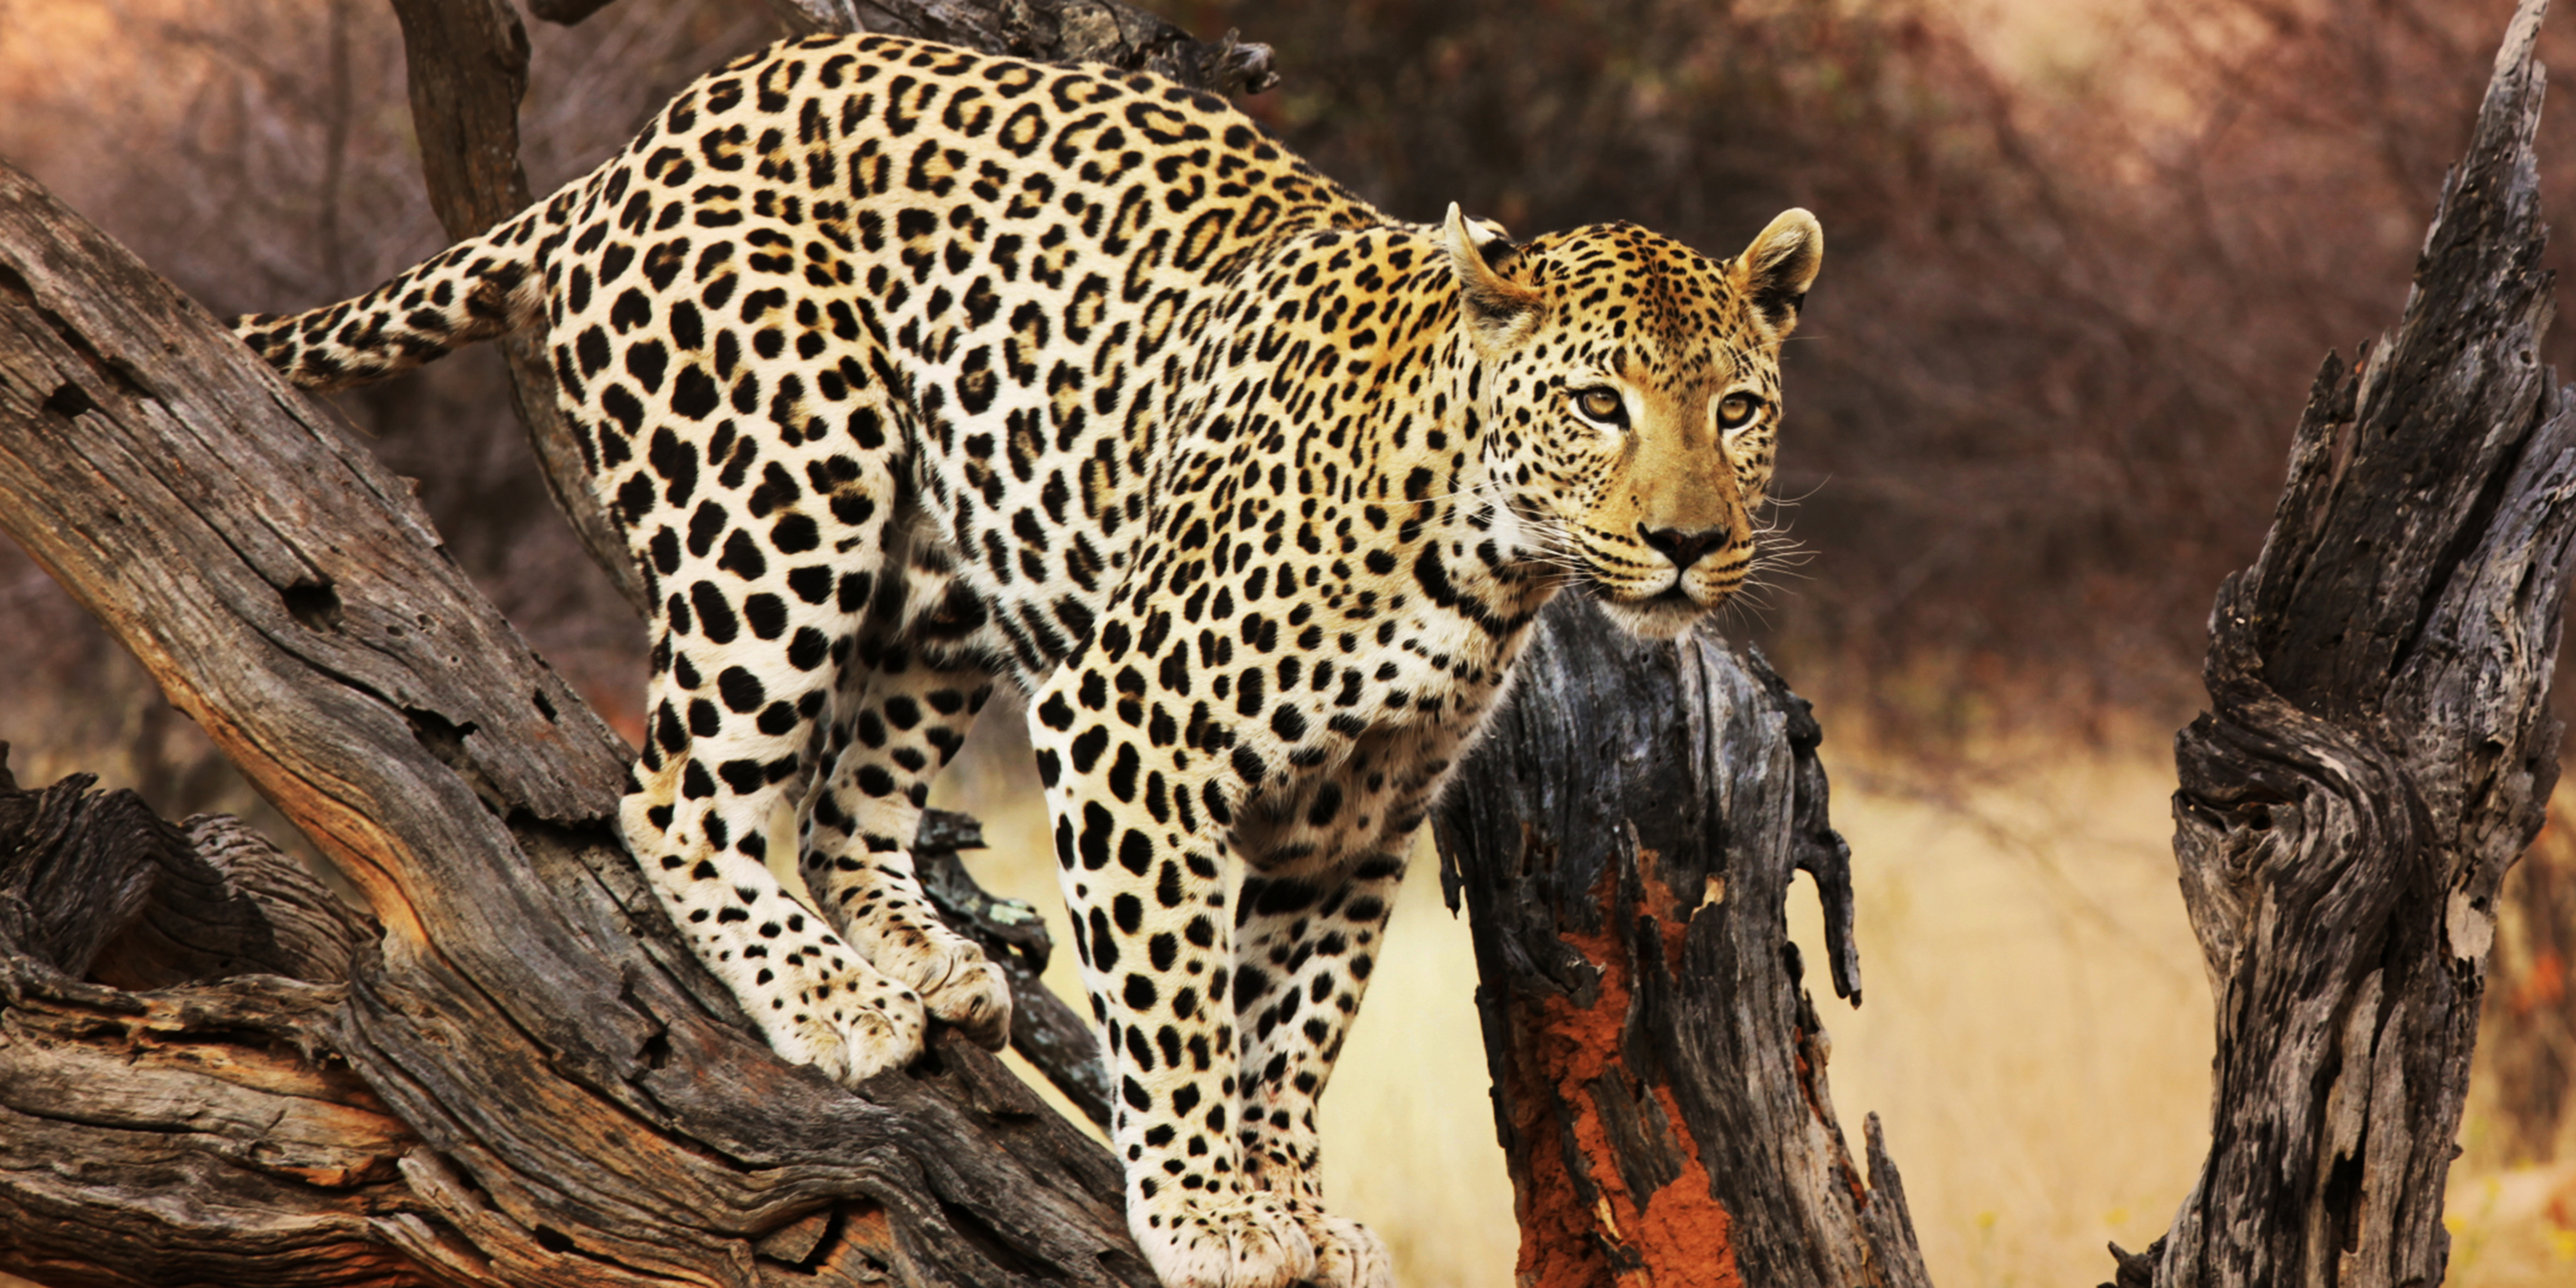 In 2016, declining leopard observations documented by Earthwatch teams led directly to a two-year moratorium on leopard hunting in South Africa. 